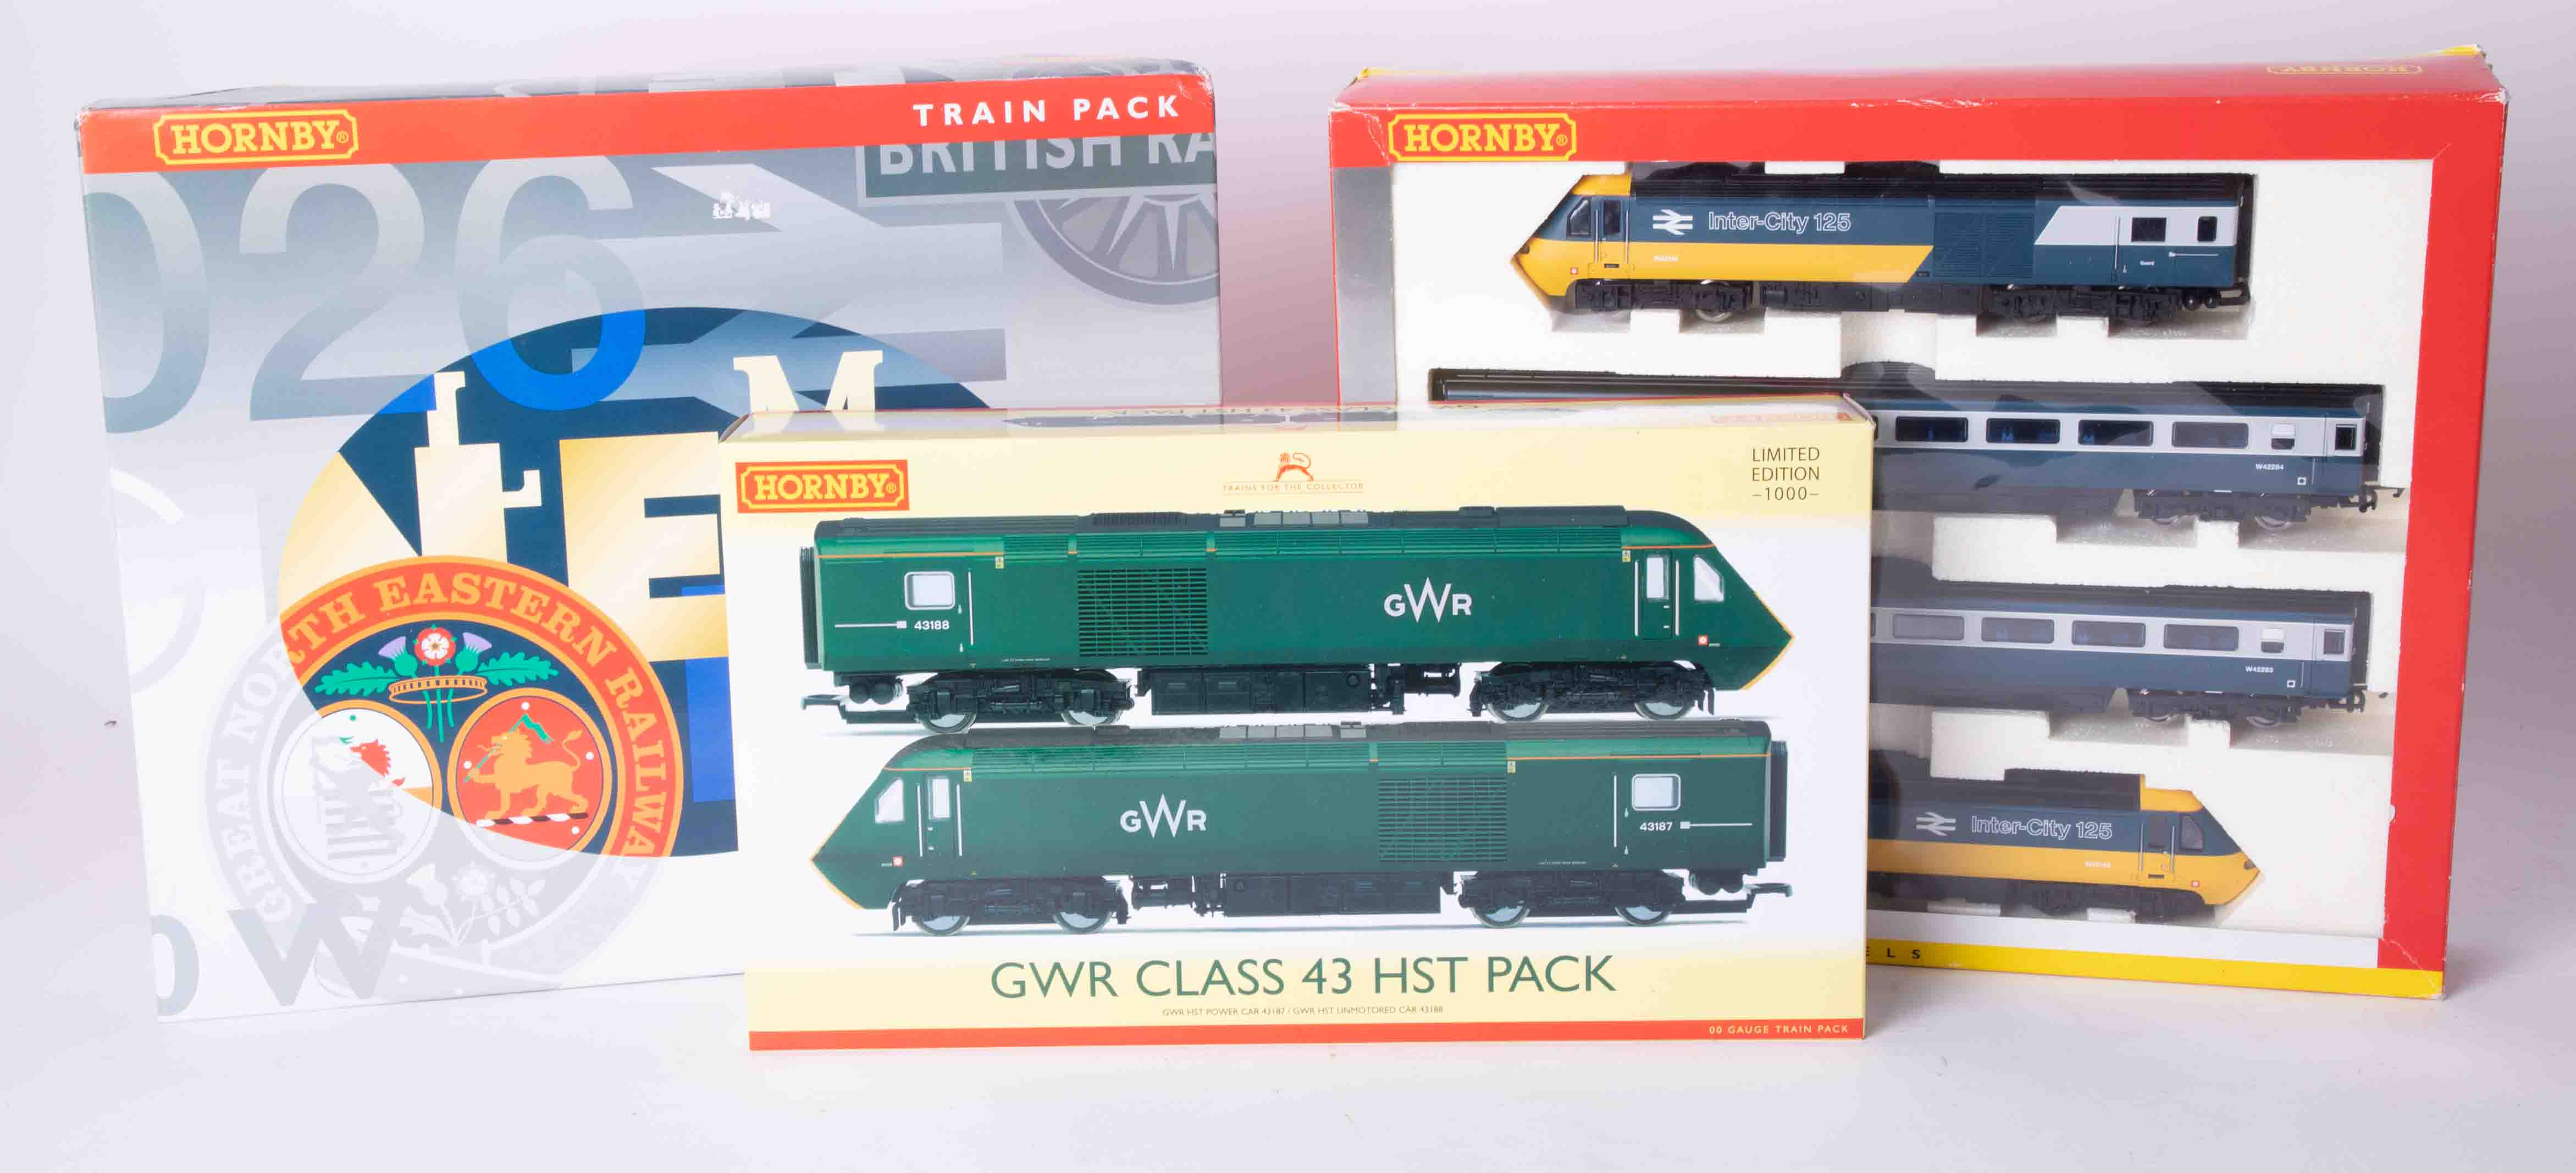 Hornby, GWR OO gauge train pack, also 125 high speed train and another Midland Mainline train